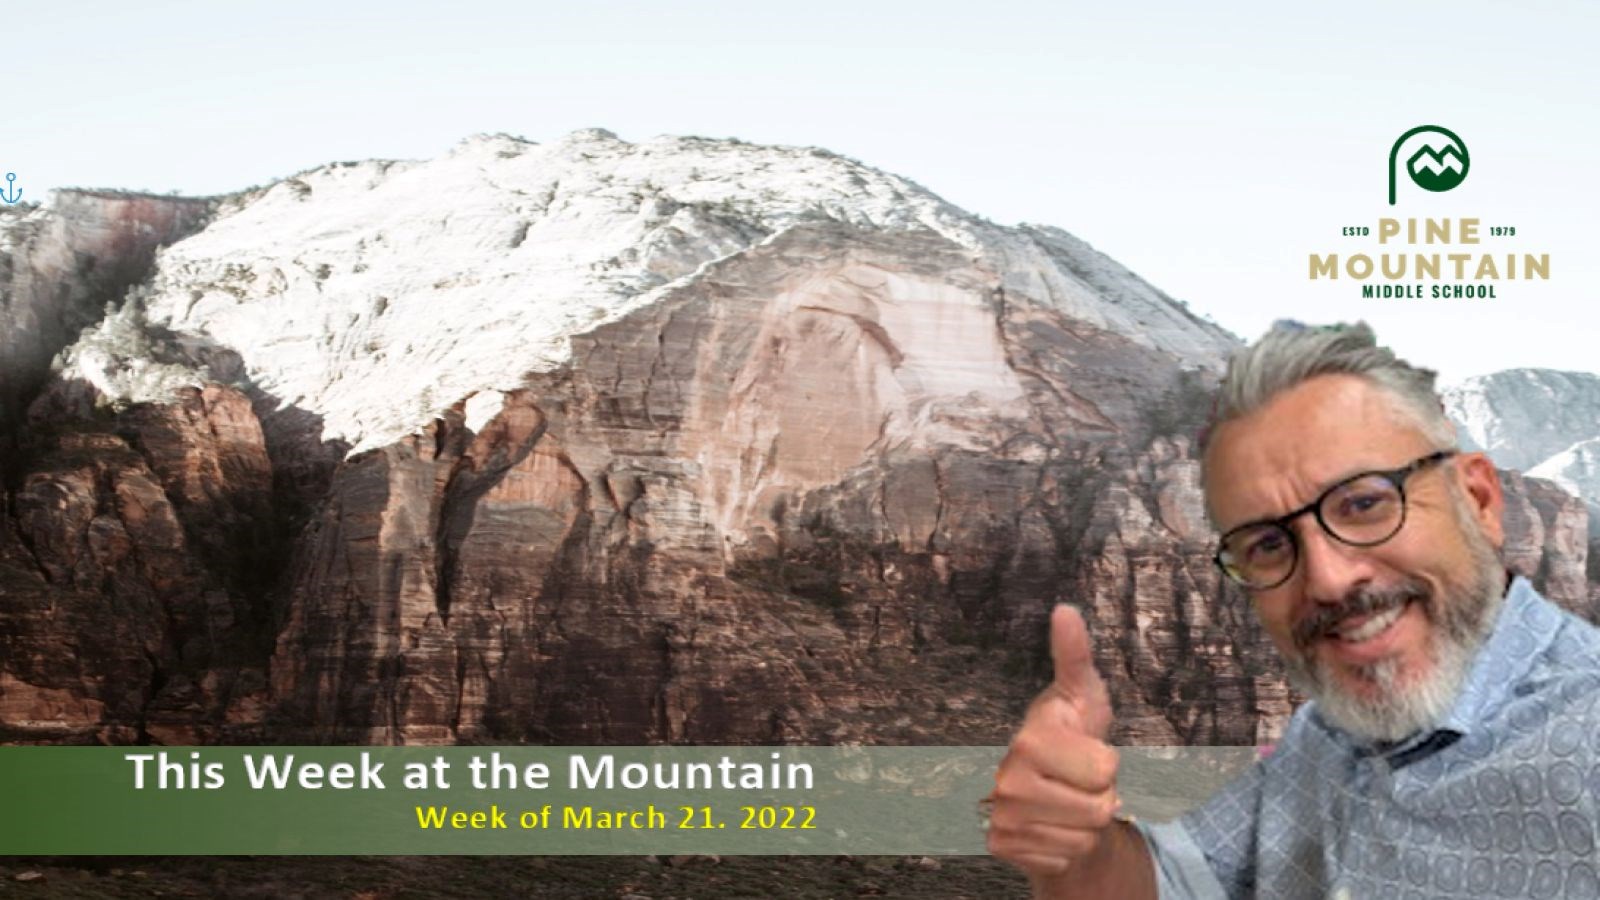 Principal in front of Mountain Background